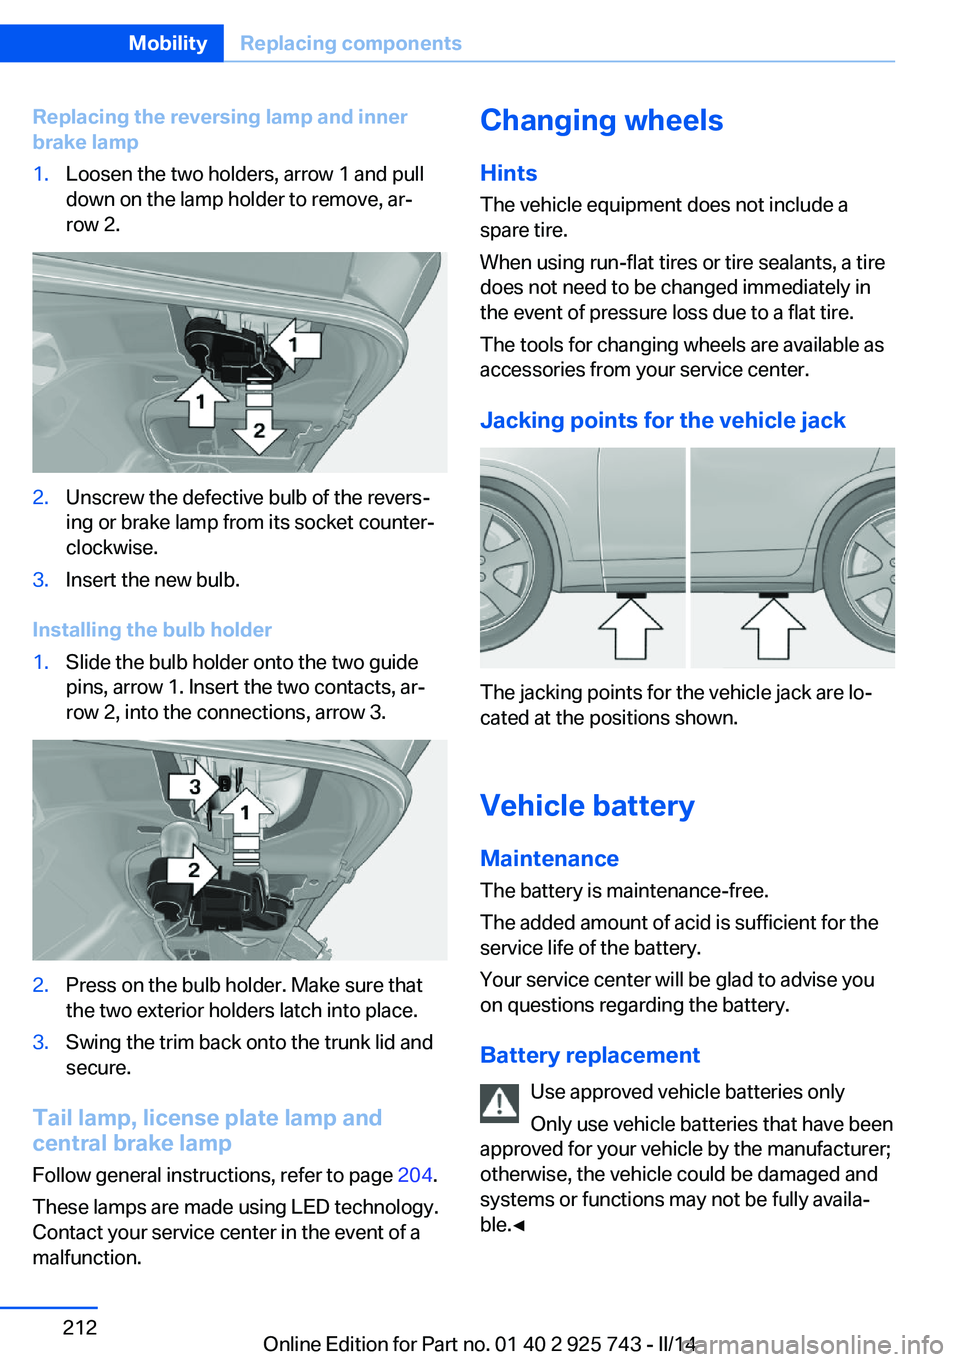 BMW 335I XDRIVE 2014  Owners Manual Replacing the reversing lamp and inner
brake lamp1.Loosen the two holders, arrow 1 and pull
down on the lamp holder to remove, ar‐
row 2.2.Unscrew the defective bulb of the revers‐
ing or brake la